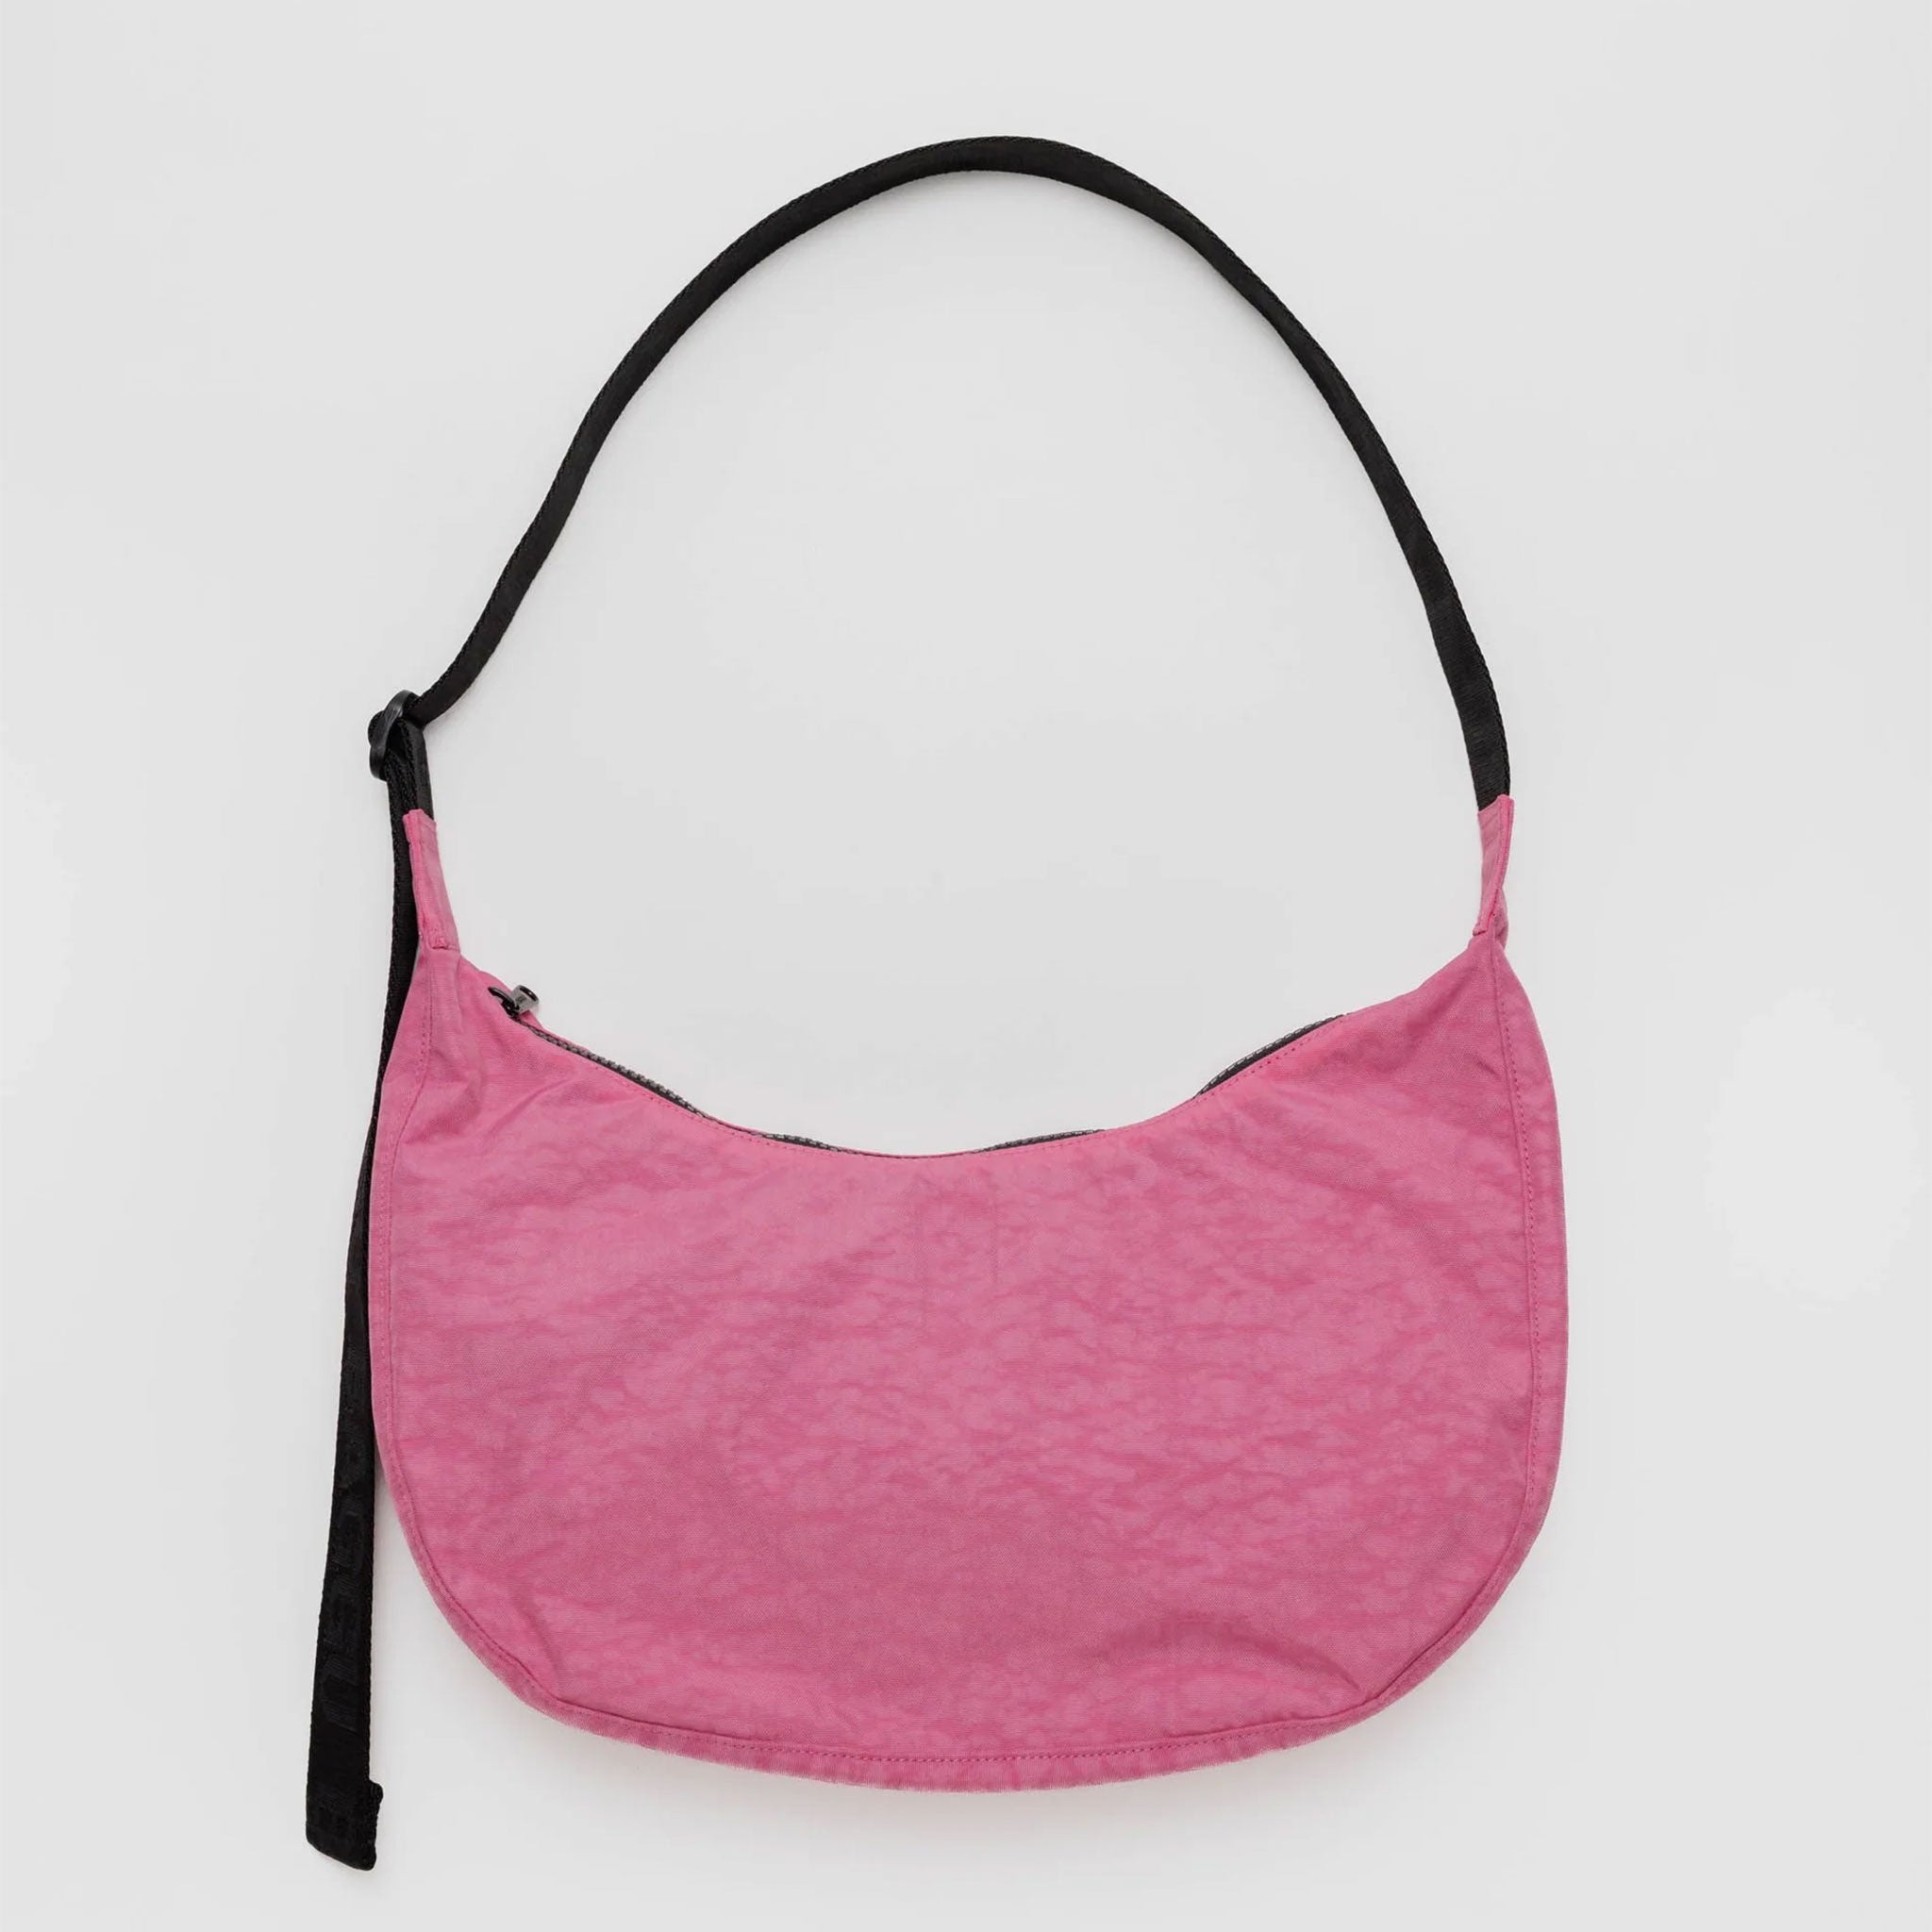 a bright pink crescent shaped bag with black strap